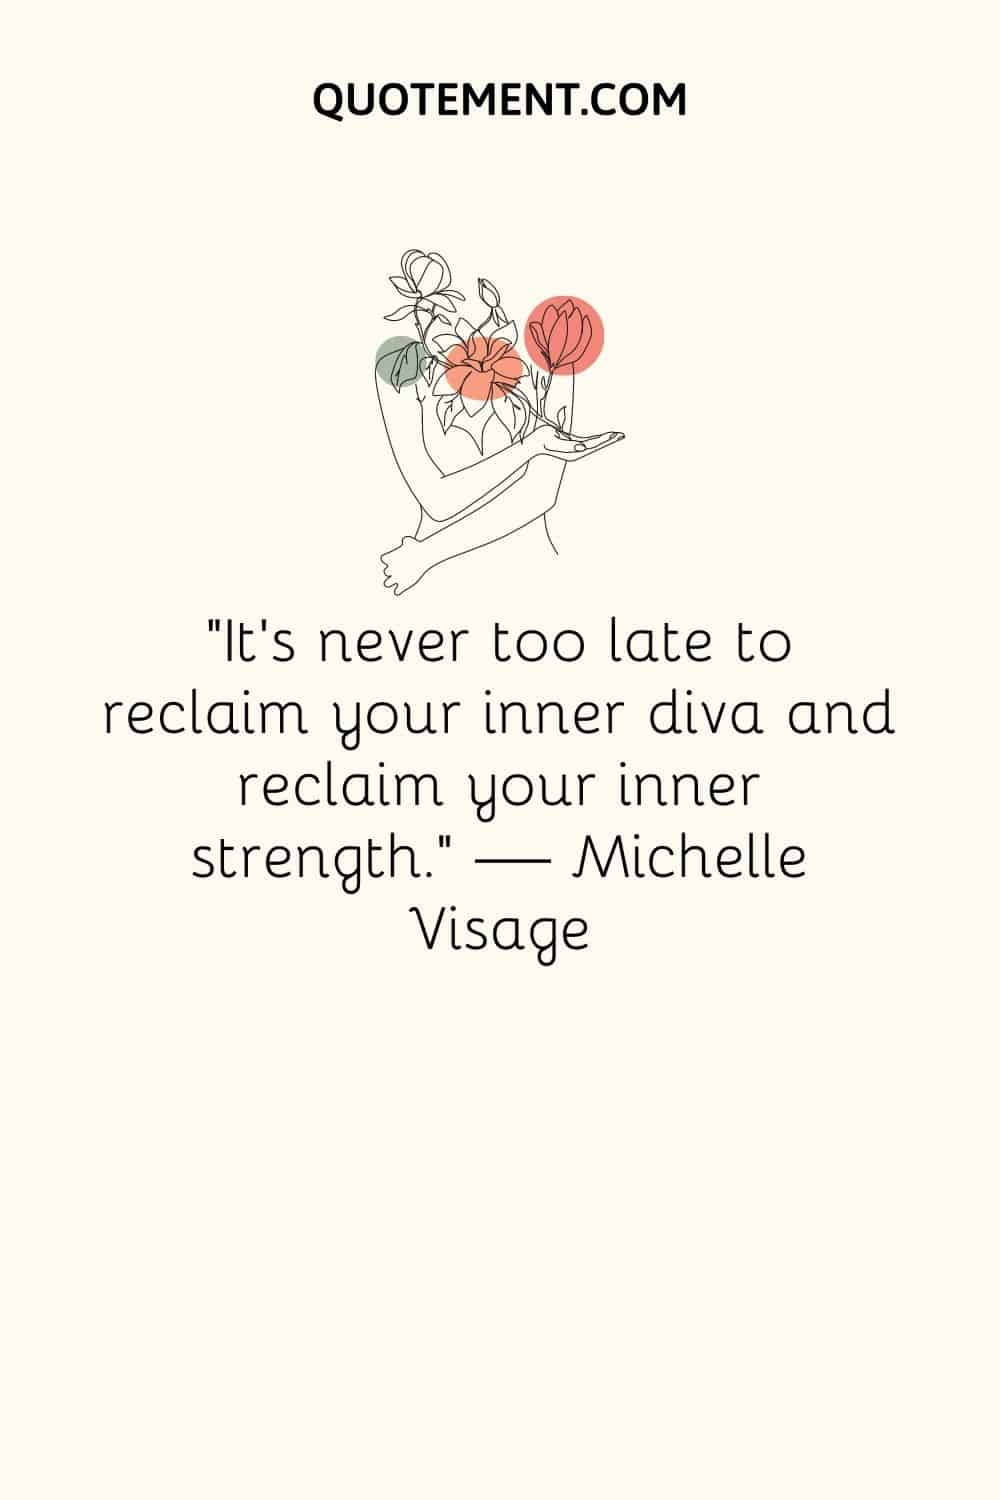 “It's never too late to reclaim your inner diva and reclaim your inner strength.” — Michelle Visage